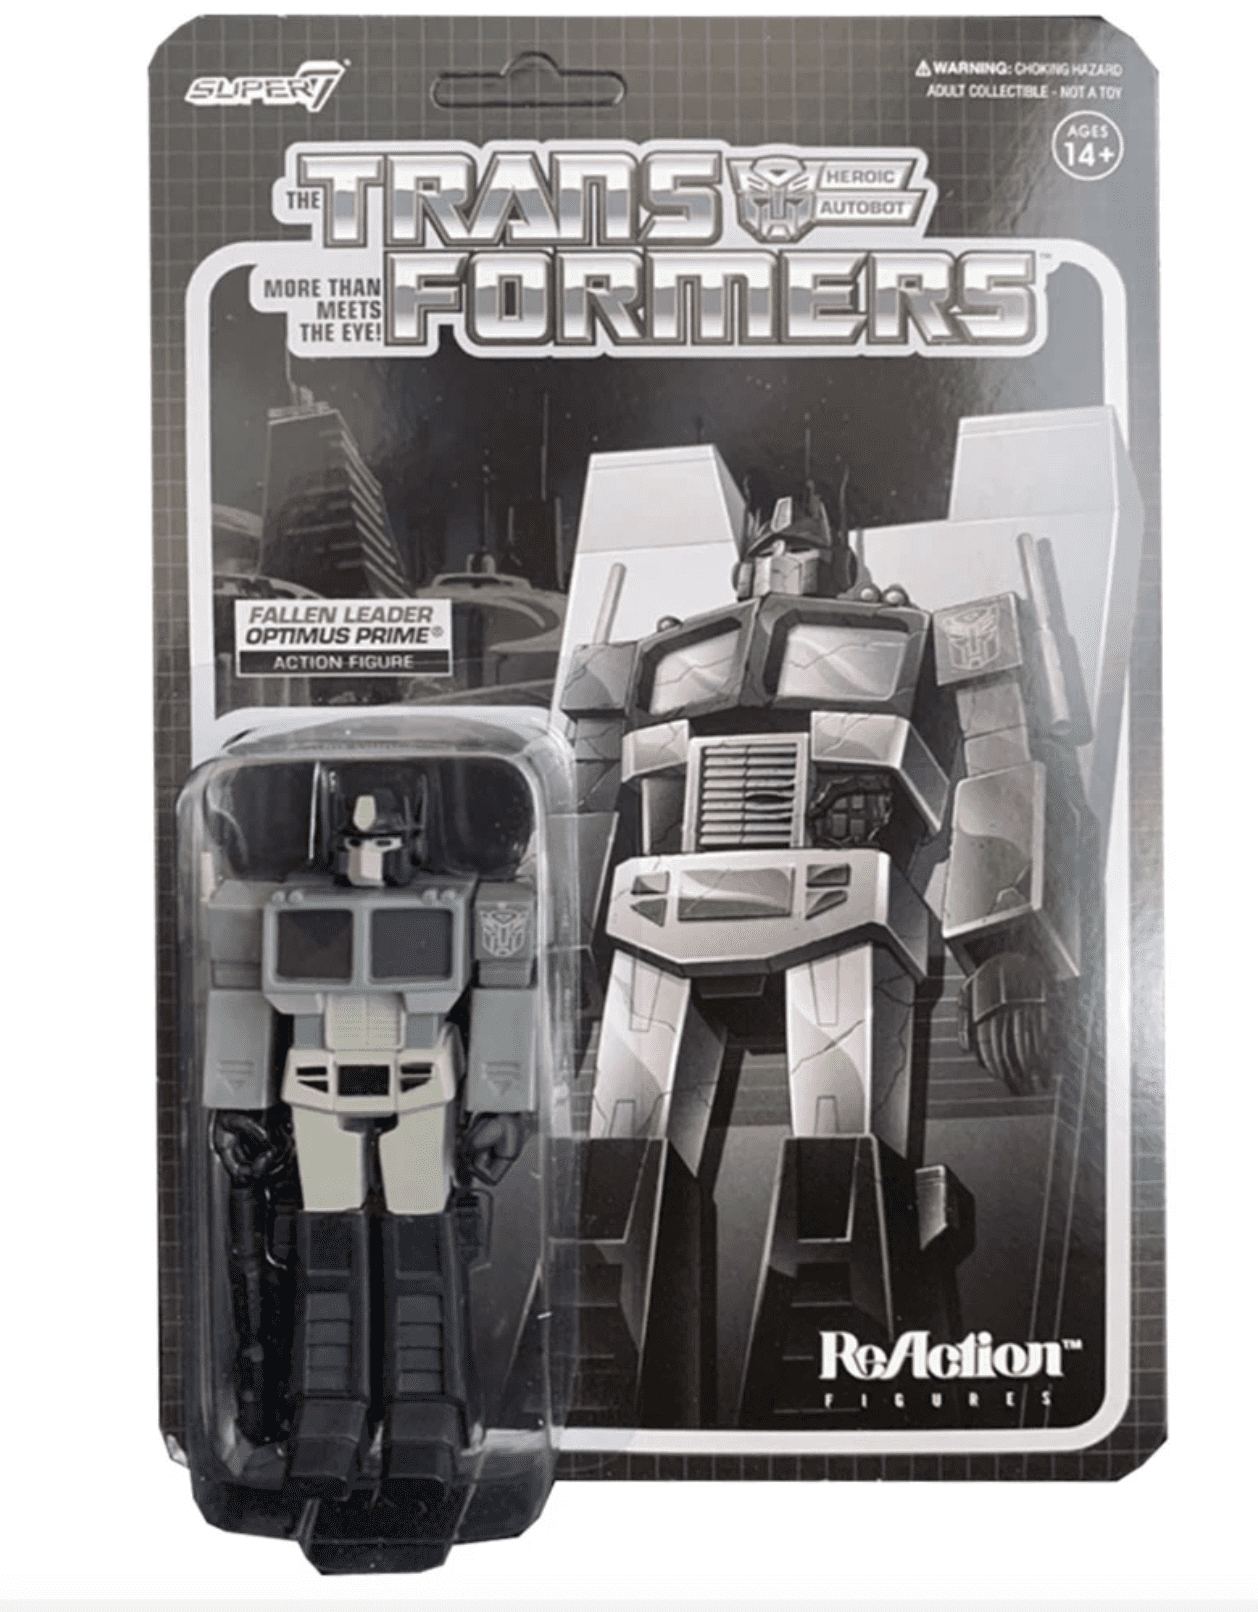 TRANSFORMERS SUPER 7 REACTION FIGURES G1 WITH PROTECTIVE CASE 